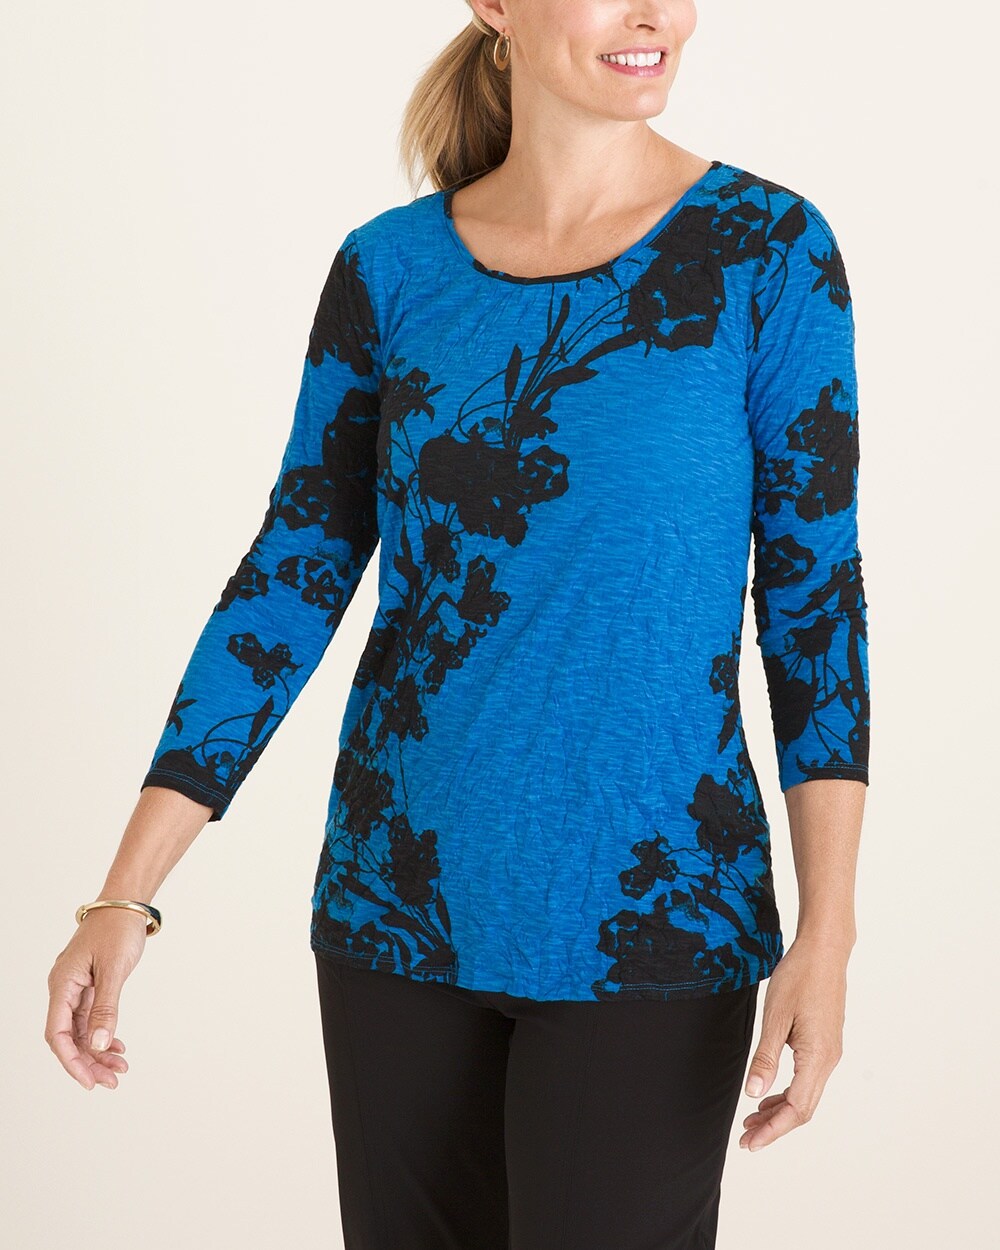 Zenergy Crushed Floral Top - Chico's